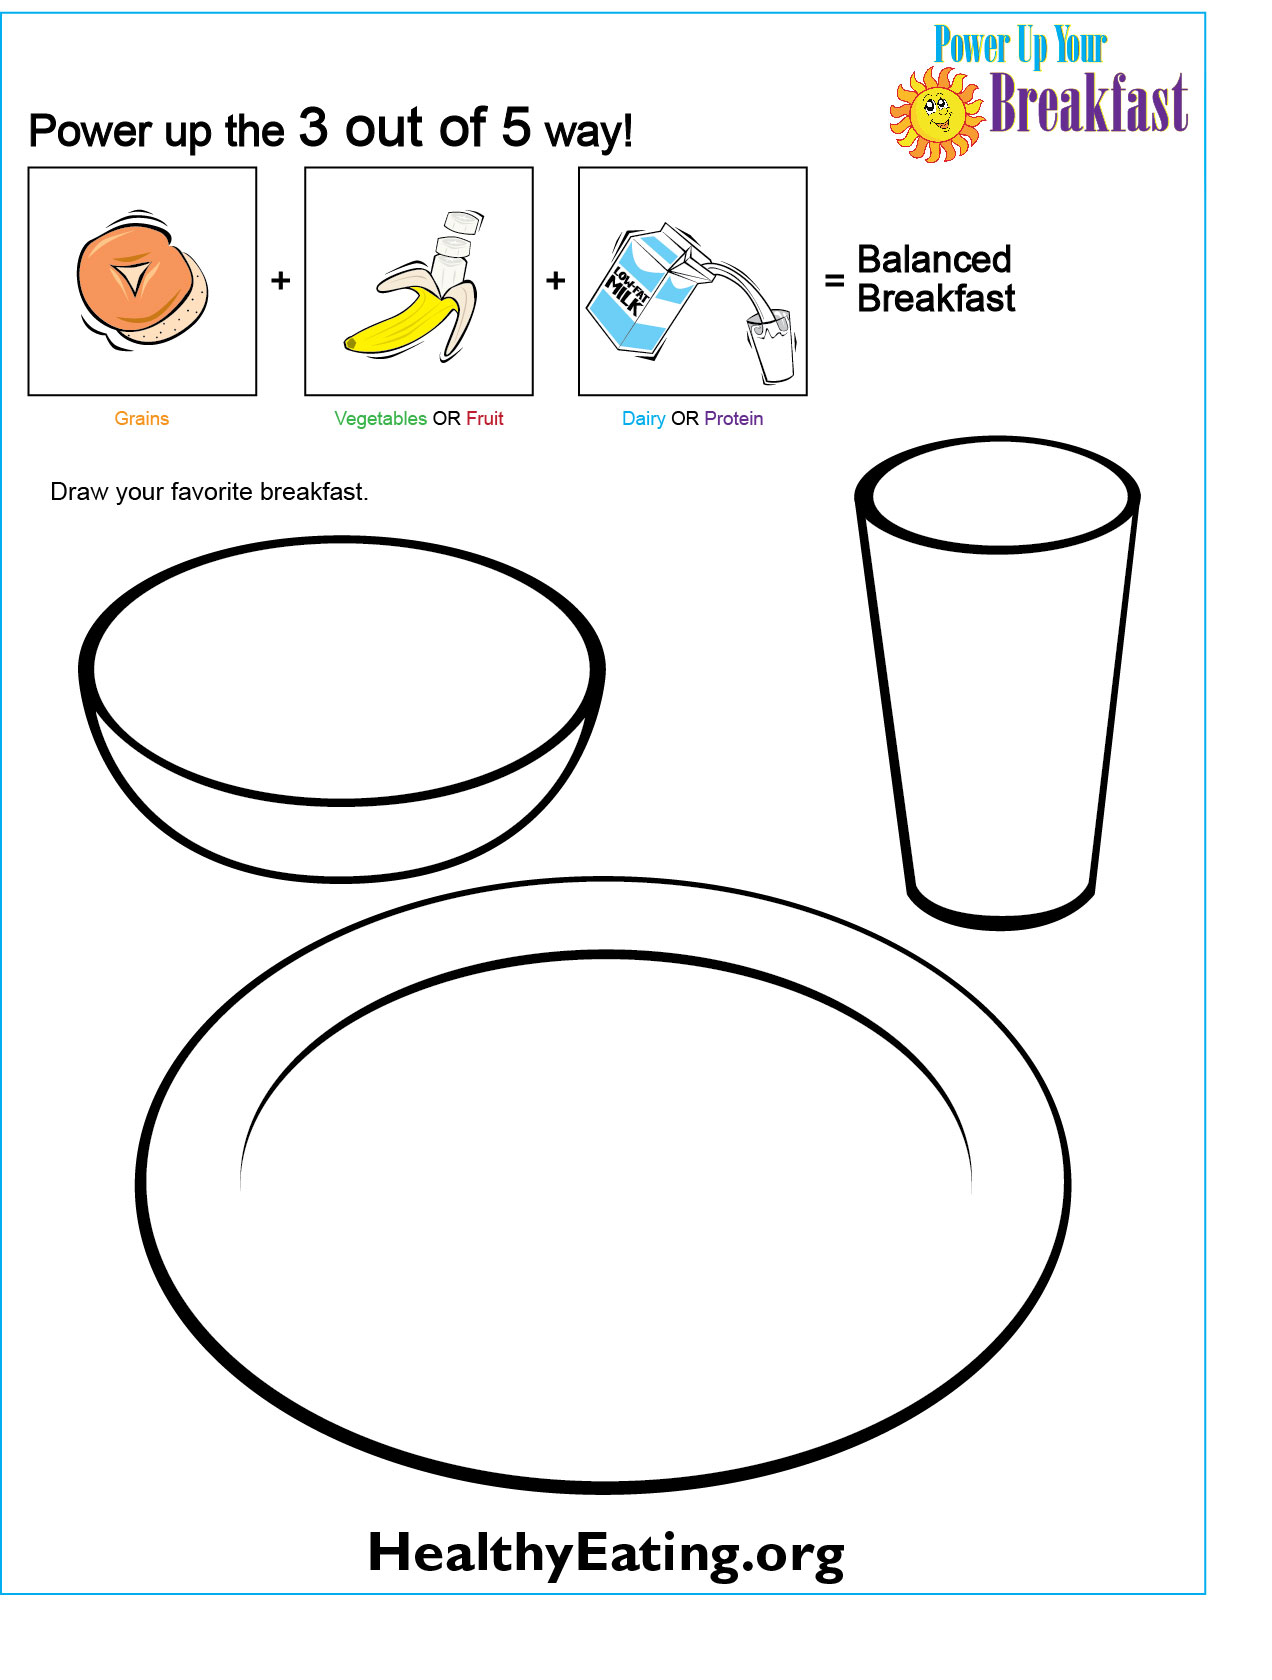 Dinner Plate Coloring Page Power Up Your Breakfast Coloring Sheet